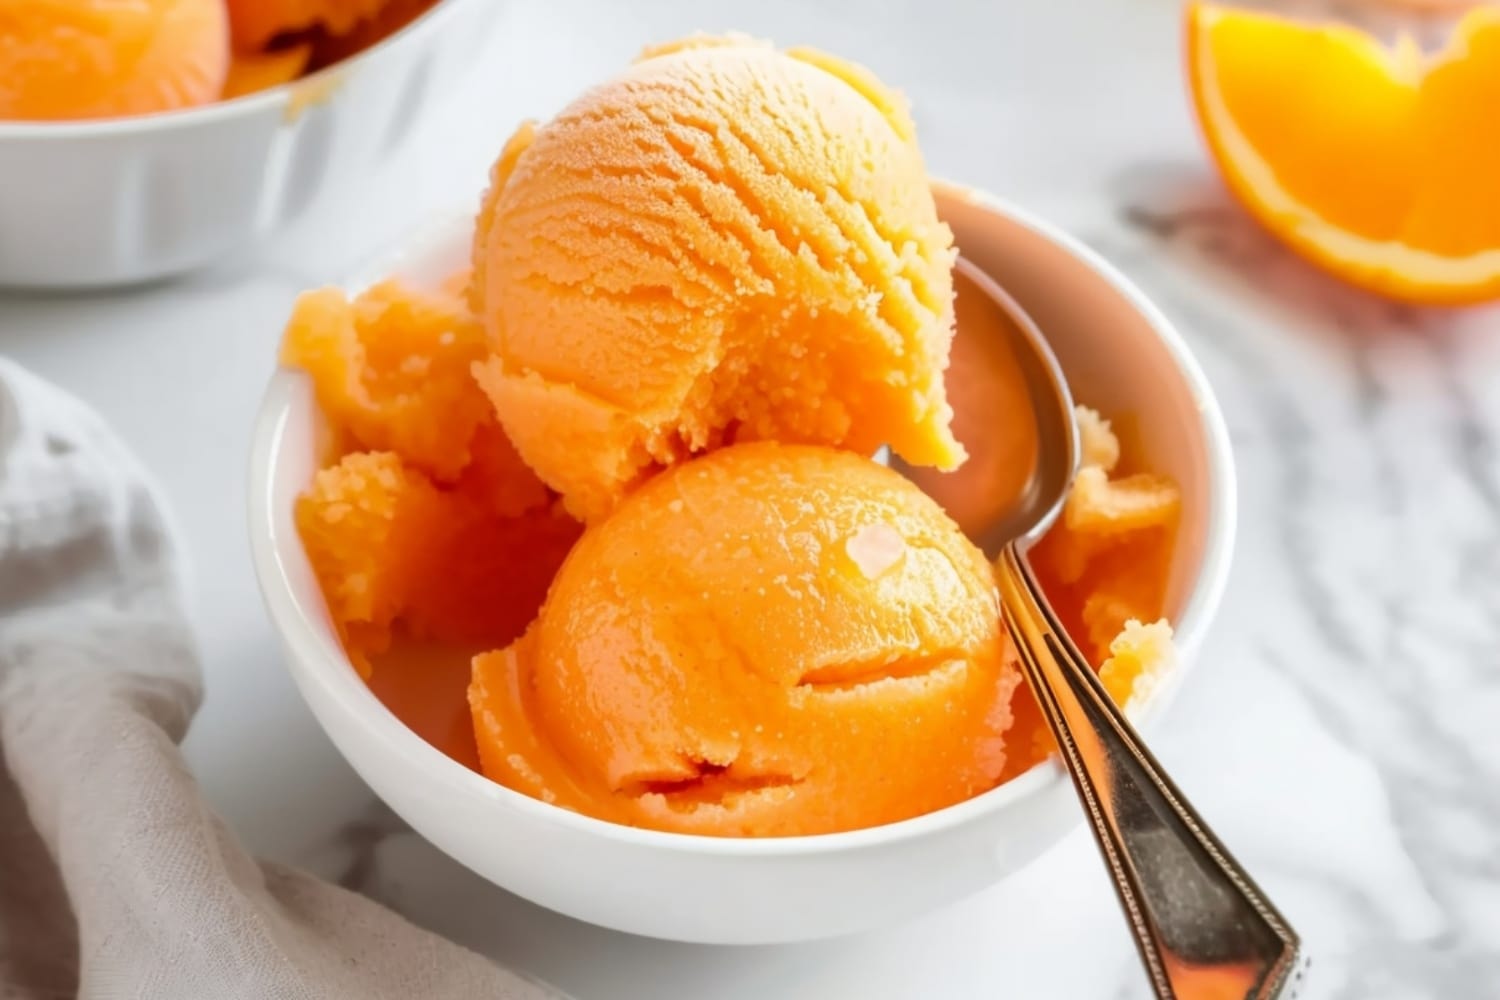 Creamy and citrusy homemade orange sorbet in a white bowl